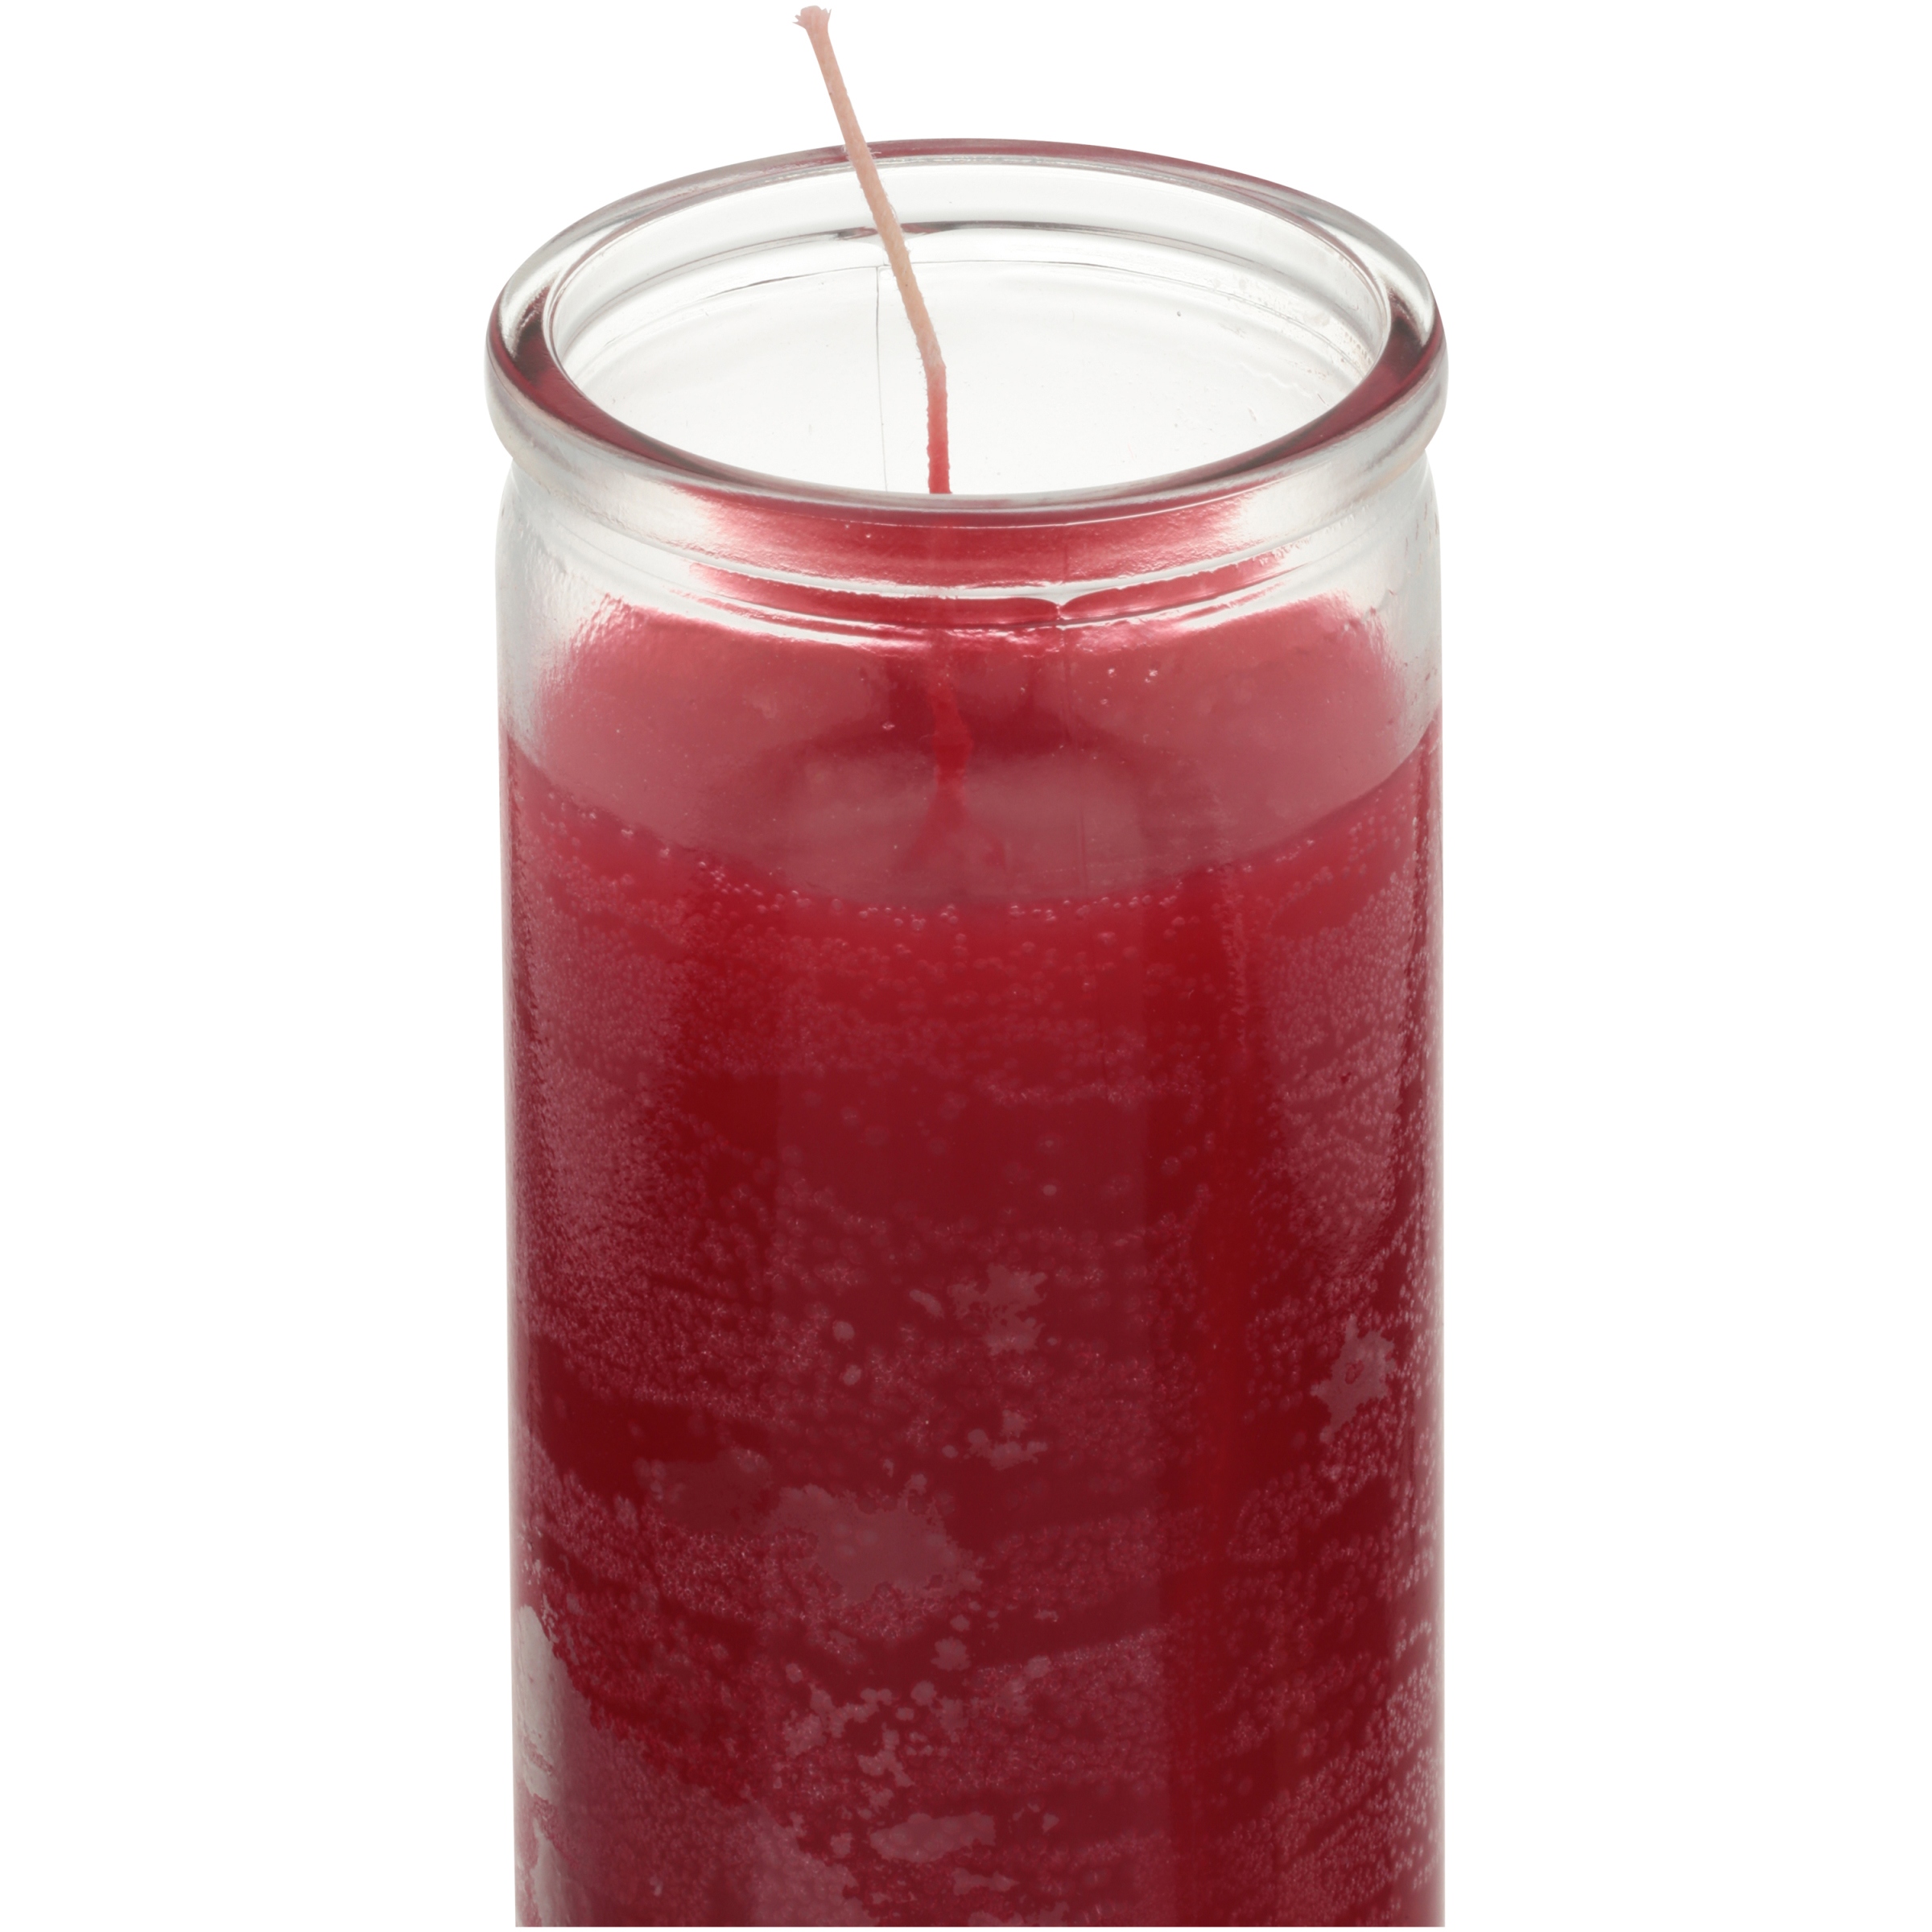 Sanctuary Solid Color Church Candles, 12 pack - image 4 of 9